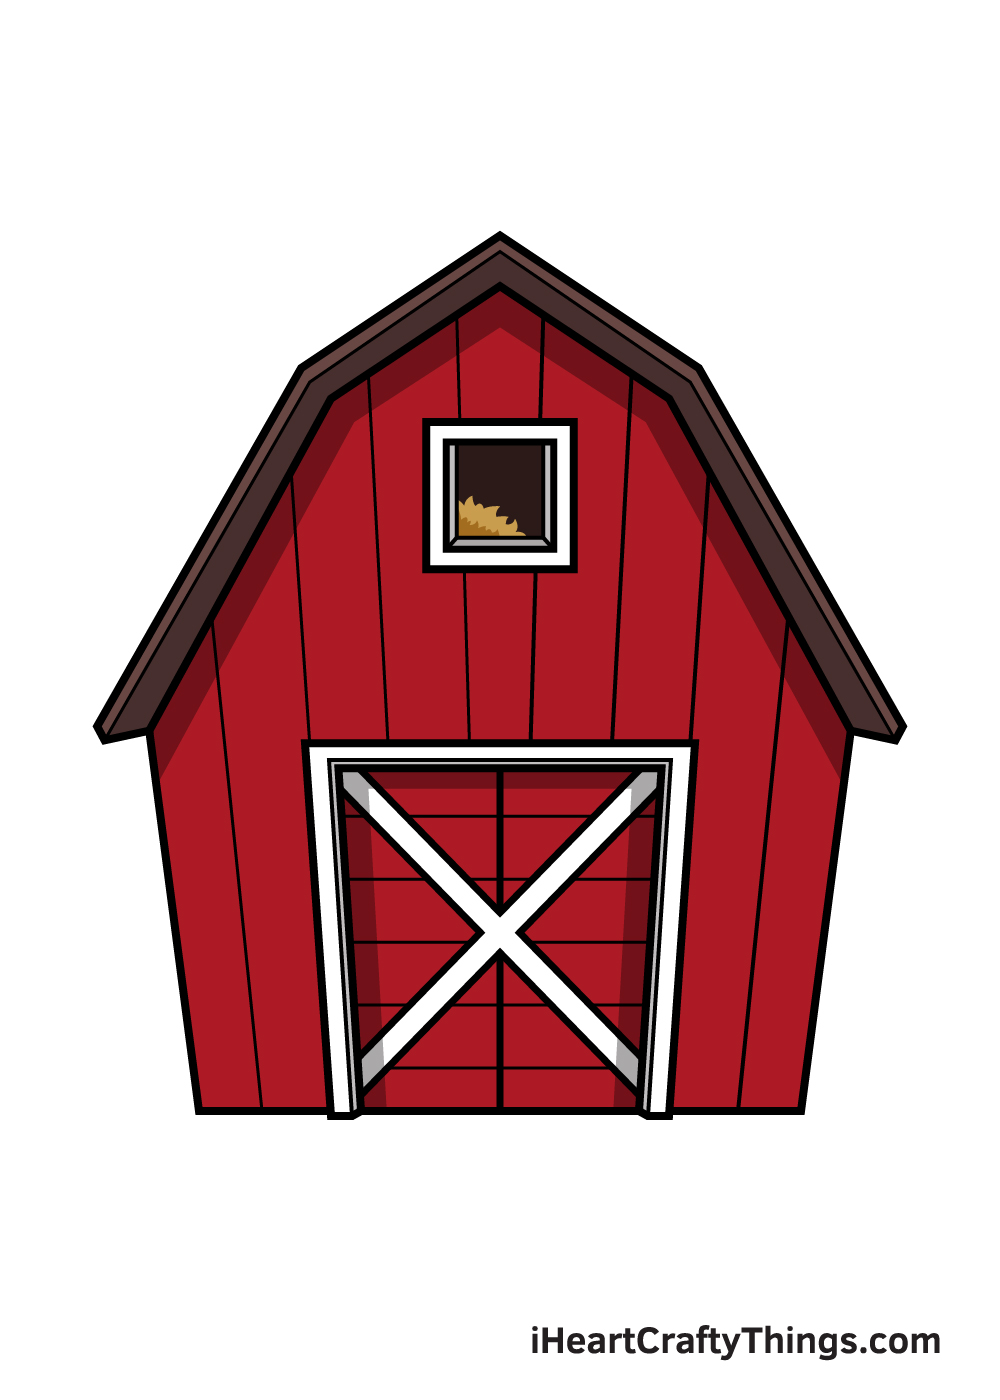 Barn Drawing - How To Draw A Barn Step By Step